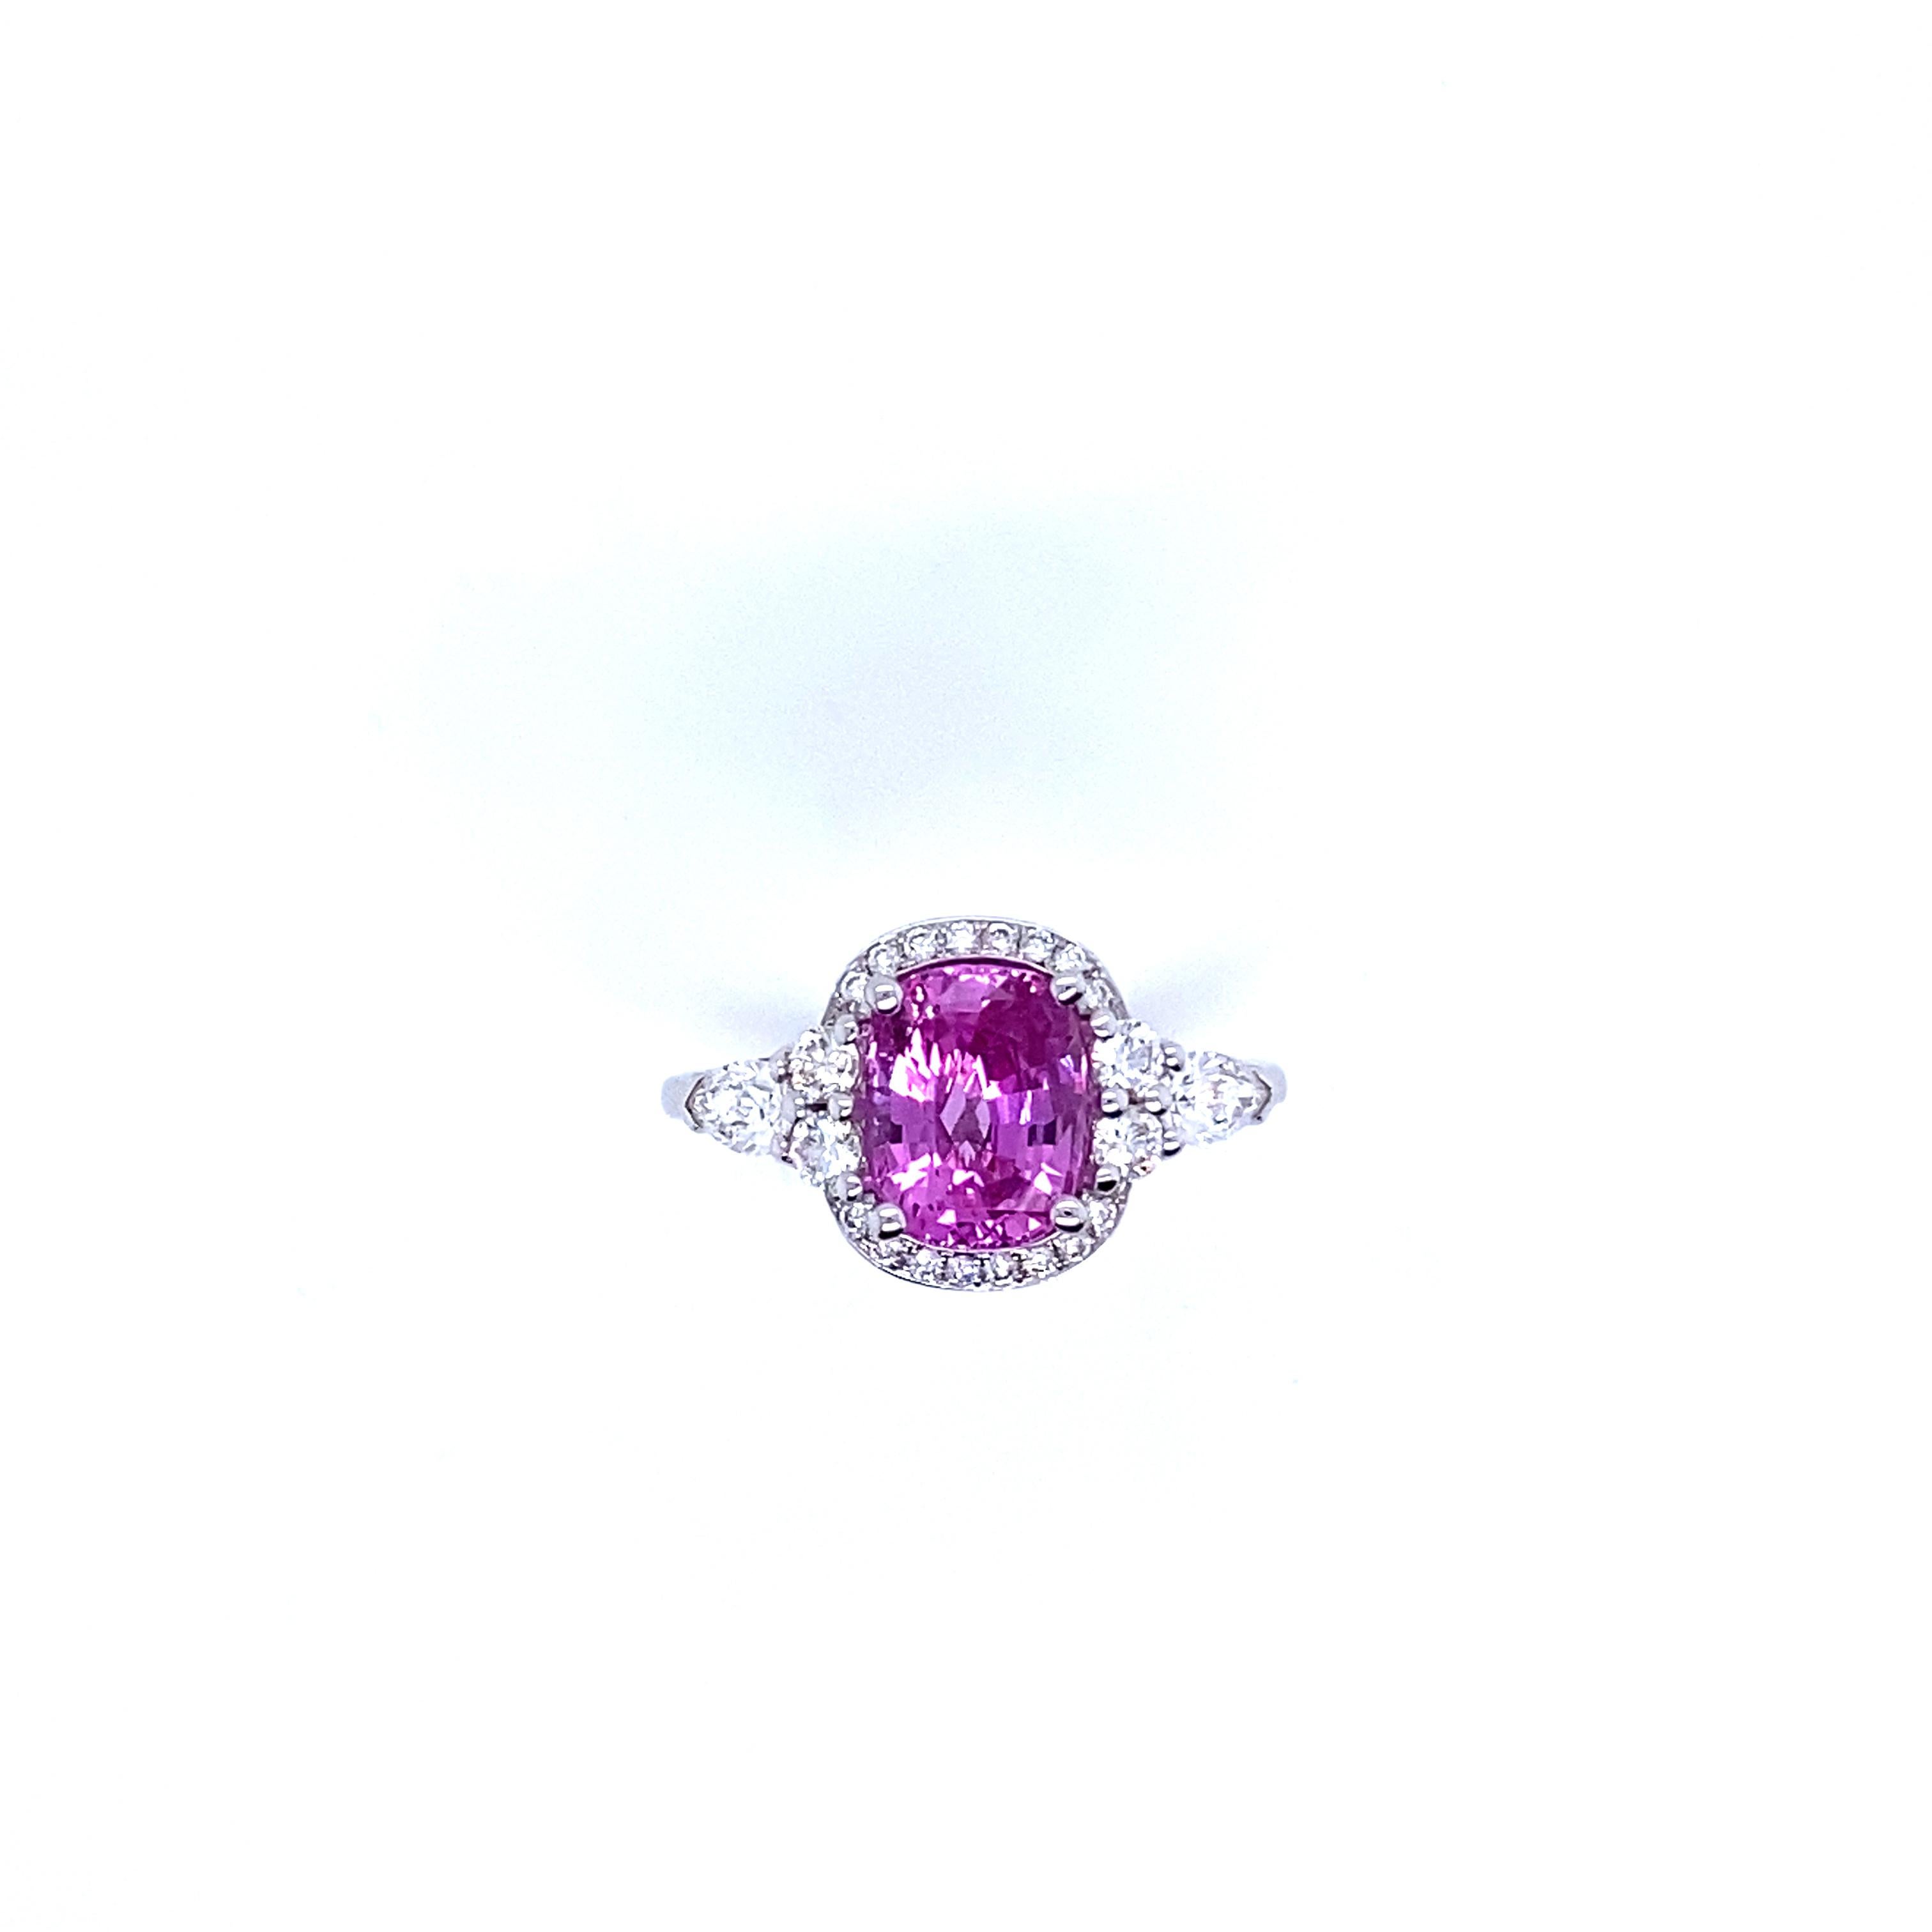 Women's Gold Engagement Ring Surmounted by a Pink Sapphire Surrounded by Diamonds